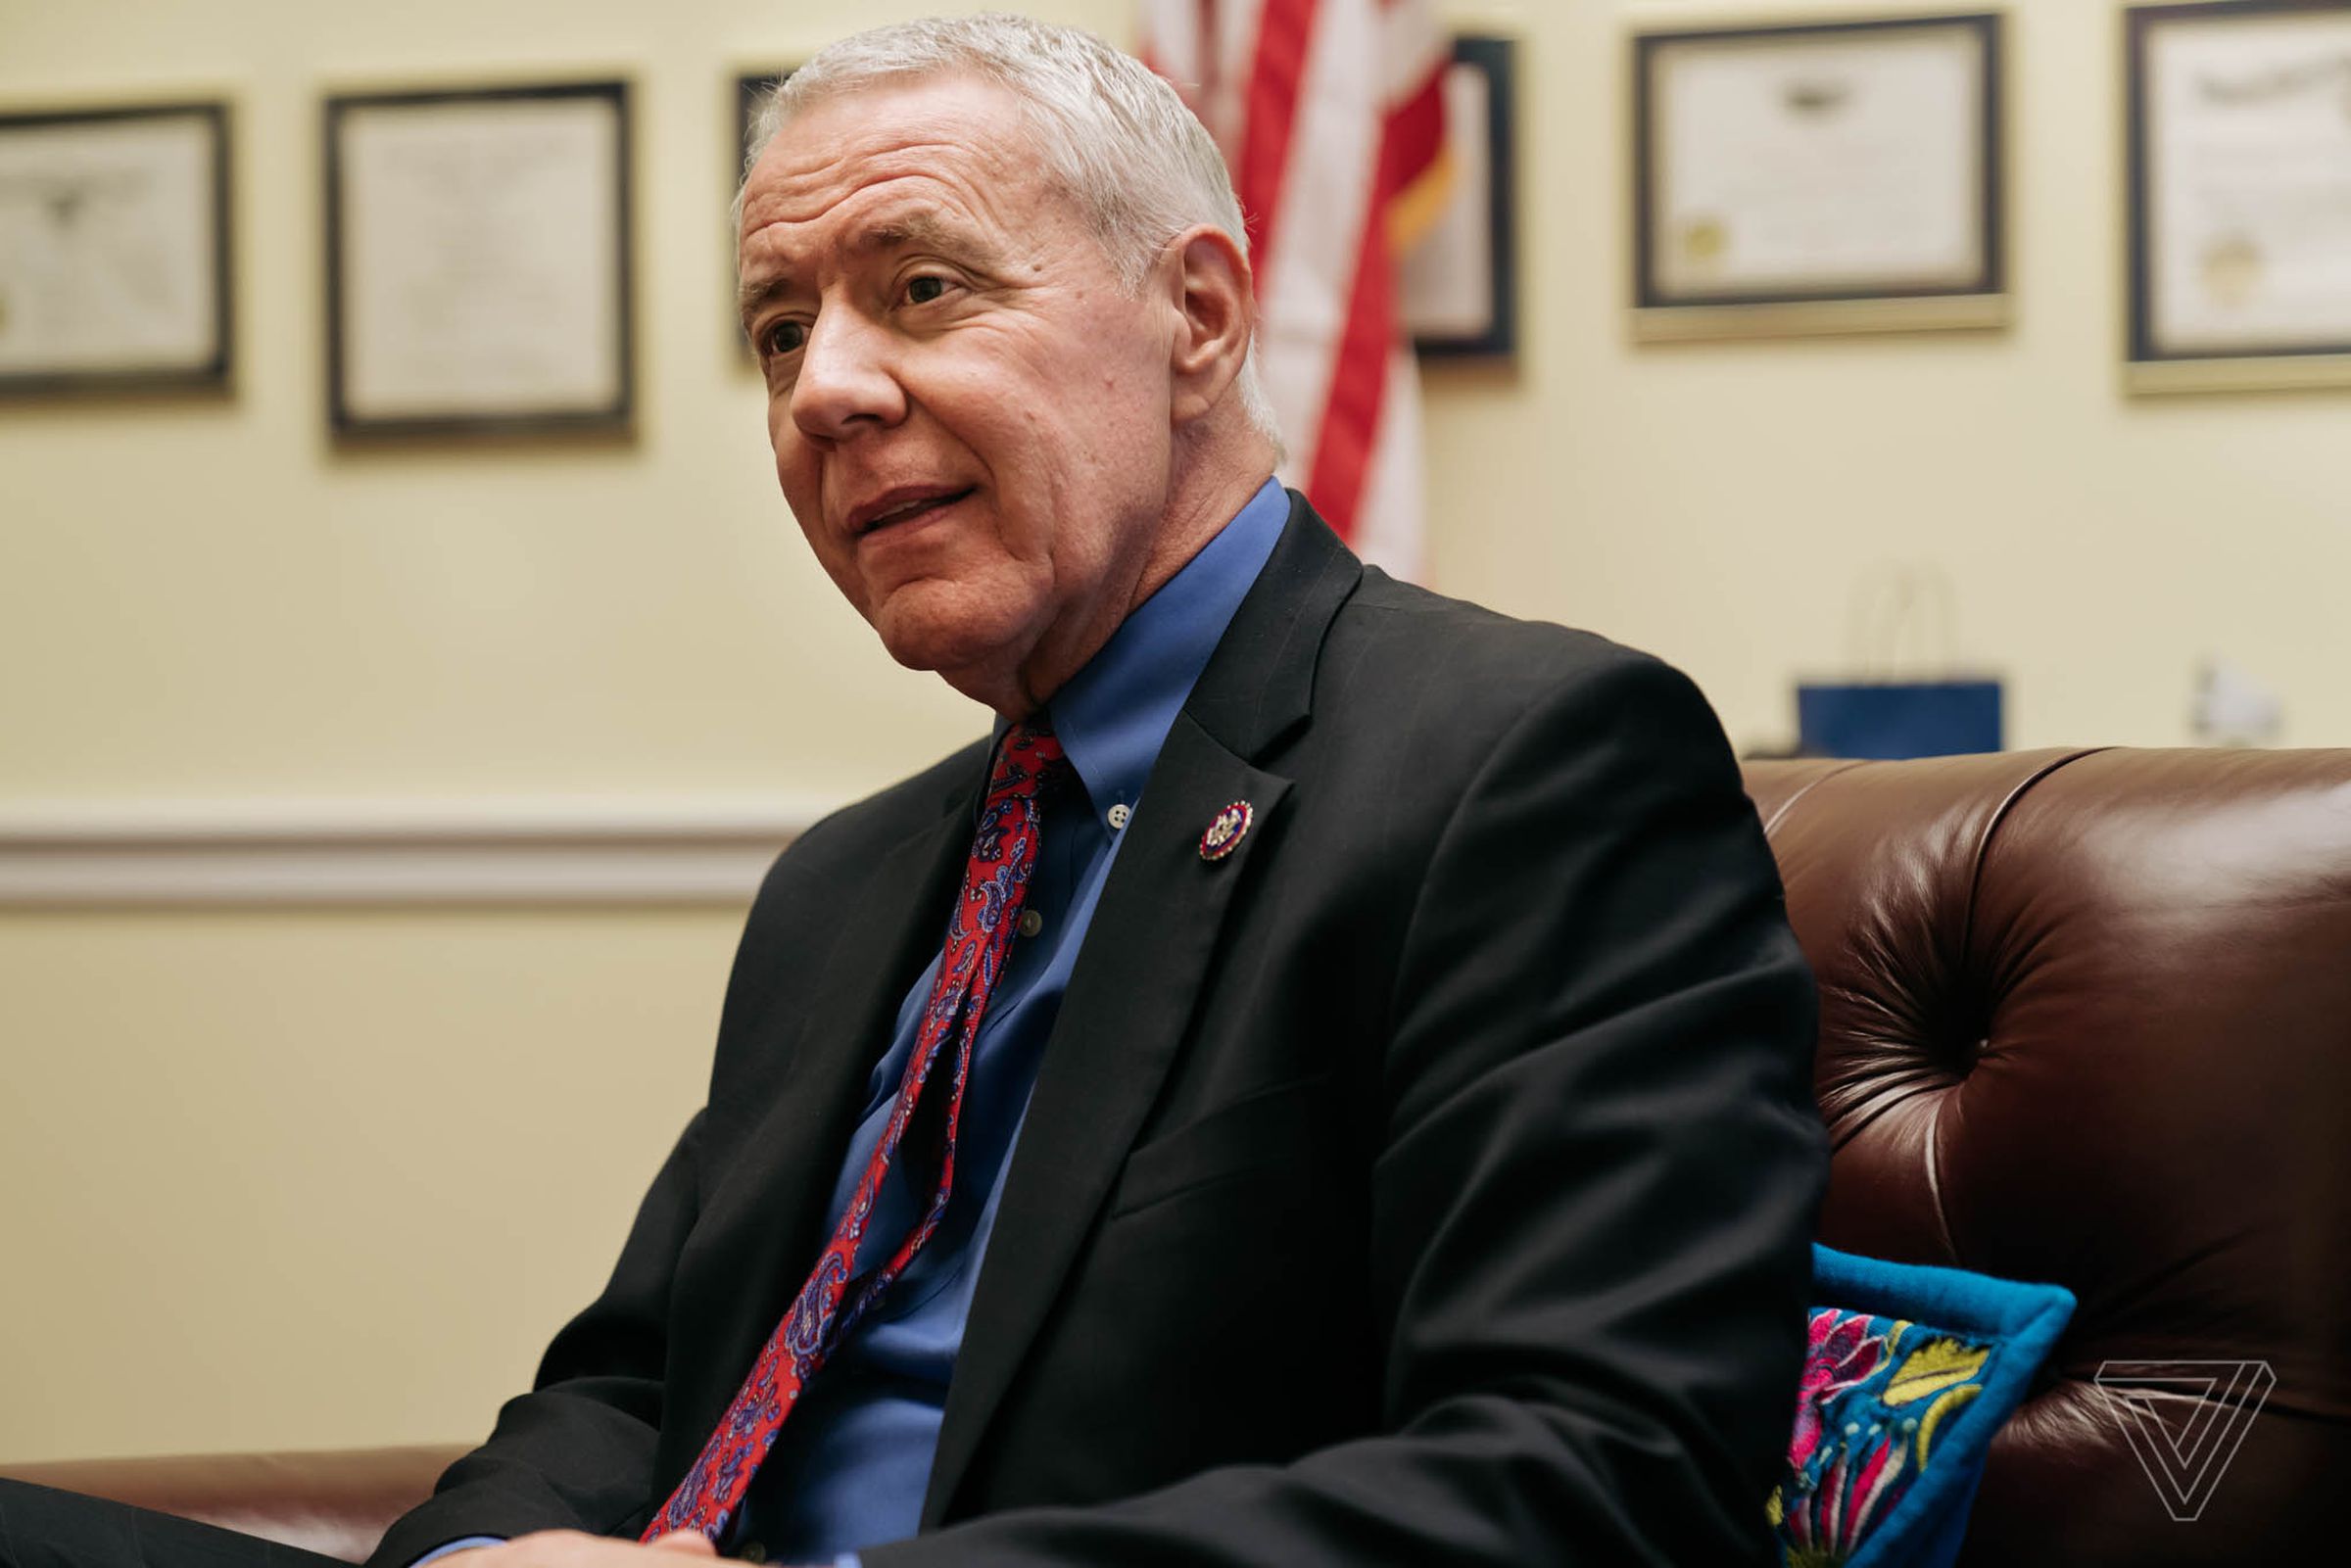 Congressman Ken Buck, R-Colo., at his office in the Rayburn Office Building in Washington, D.C., on June 30, 2021.